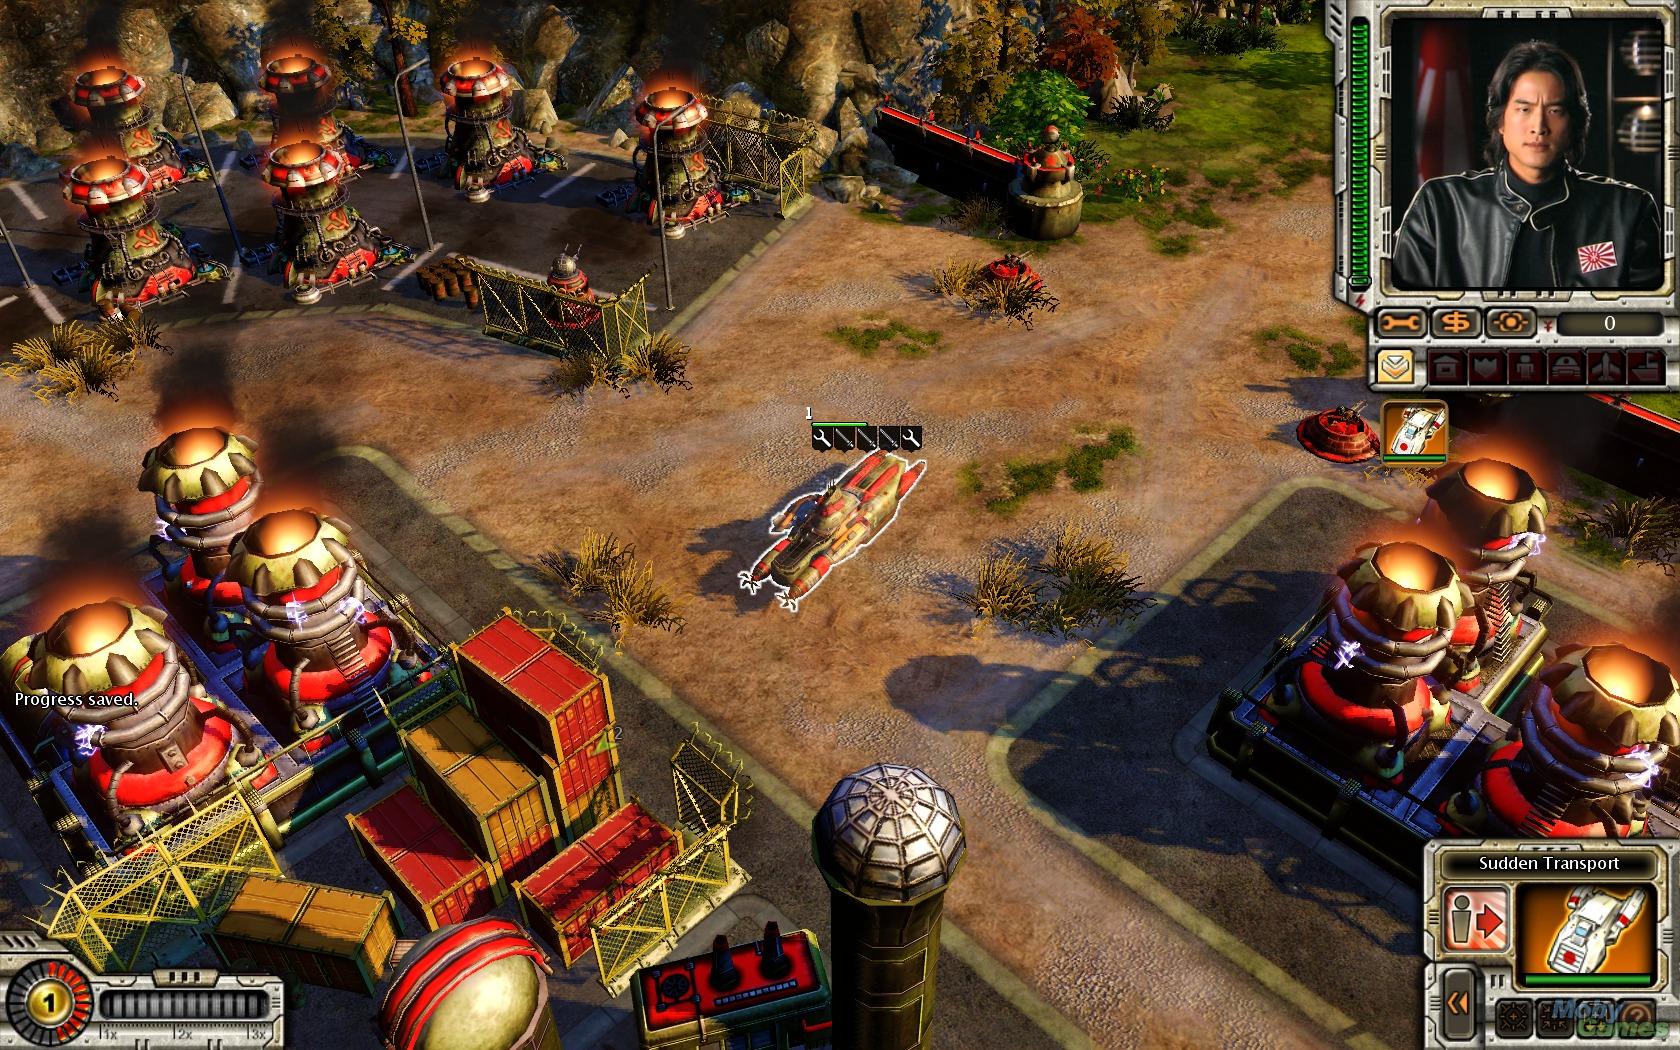 download command and conquer red alert 3 uprising torrent